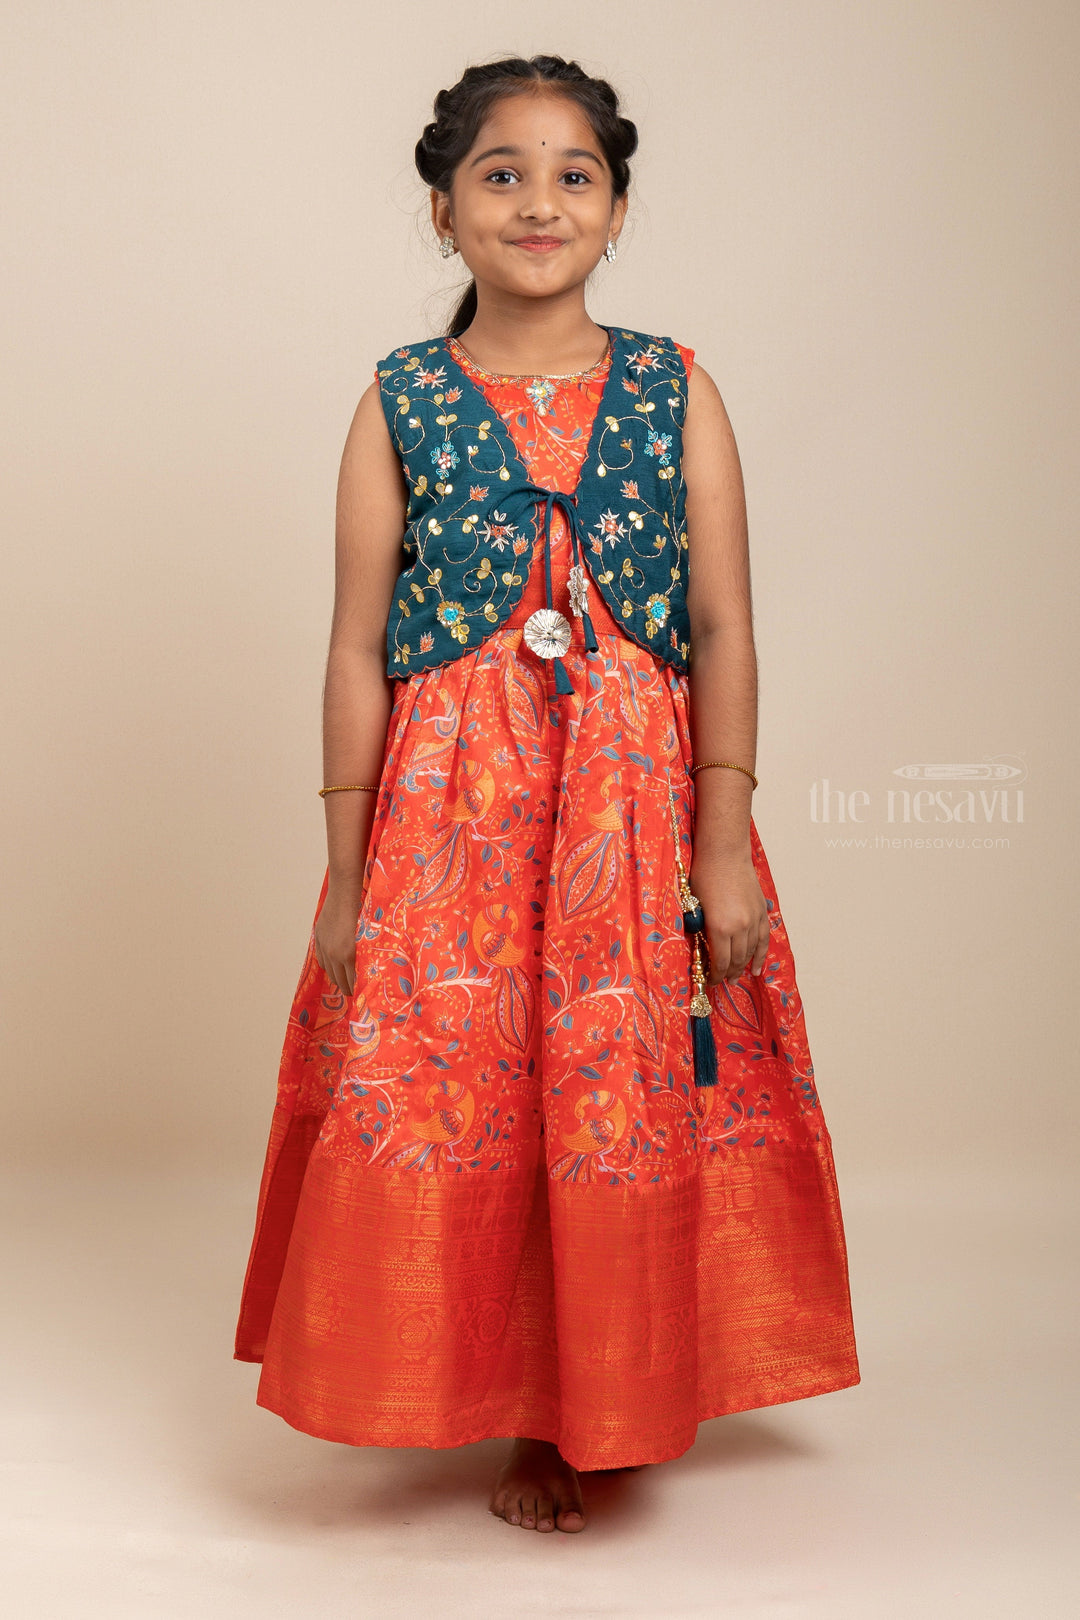 The Nesavu Silk Gown Bright Red Silk Cotton Ethnic Festive Wear For Baby Girls With Embroidery Over Coat Nesavu 16 (1Y) / Salmon / Silk Blend GA120A-16 Bright Red Silk Kalamkari Frocks | Latest Embroidery Over Coat For Girls | The Nesavu